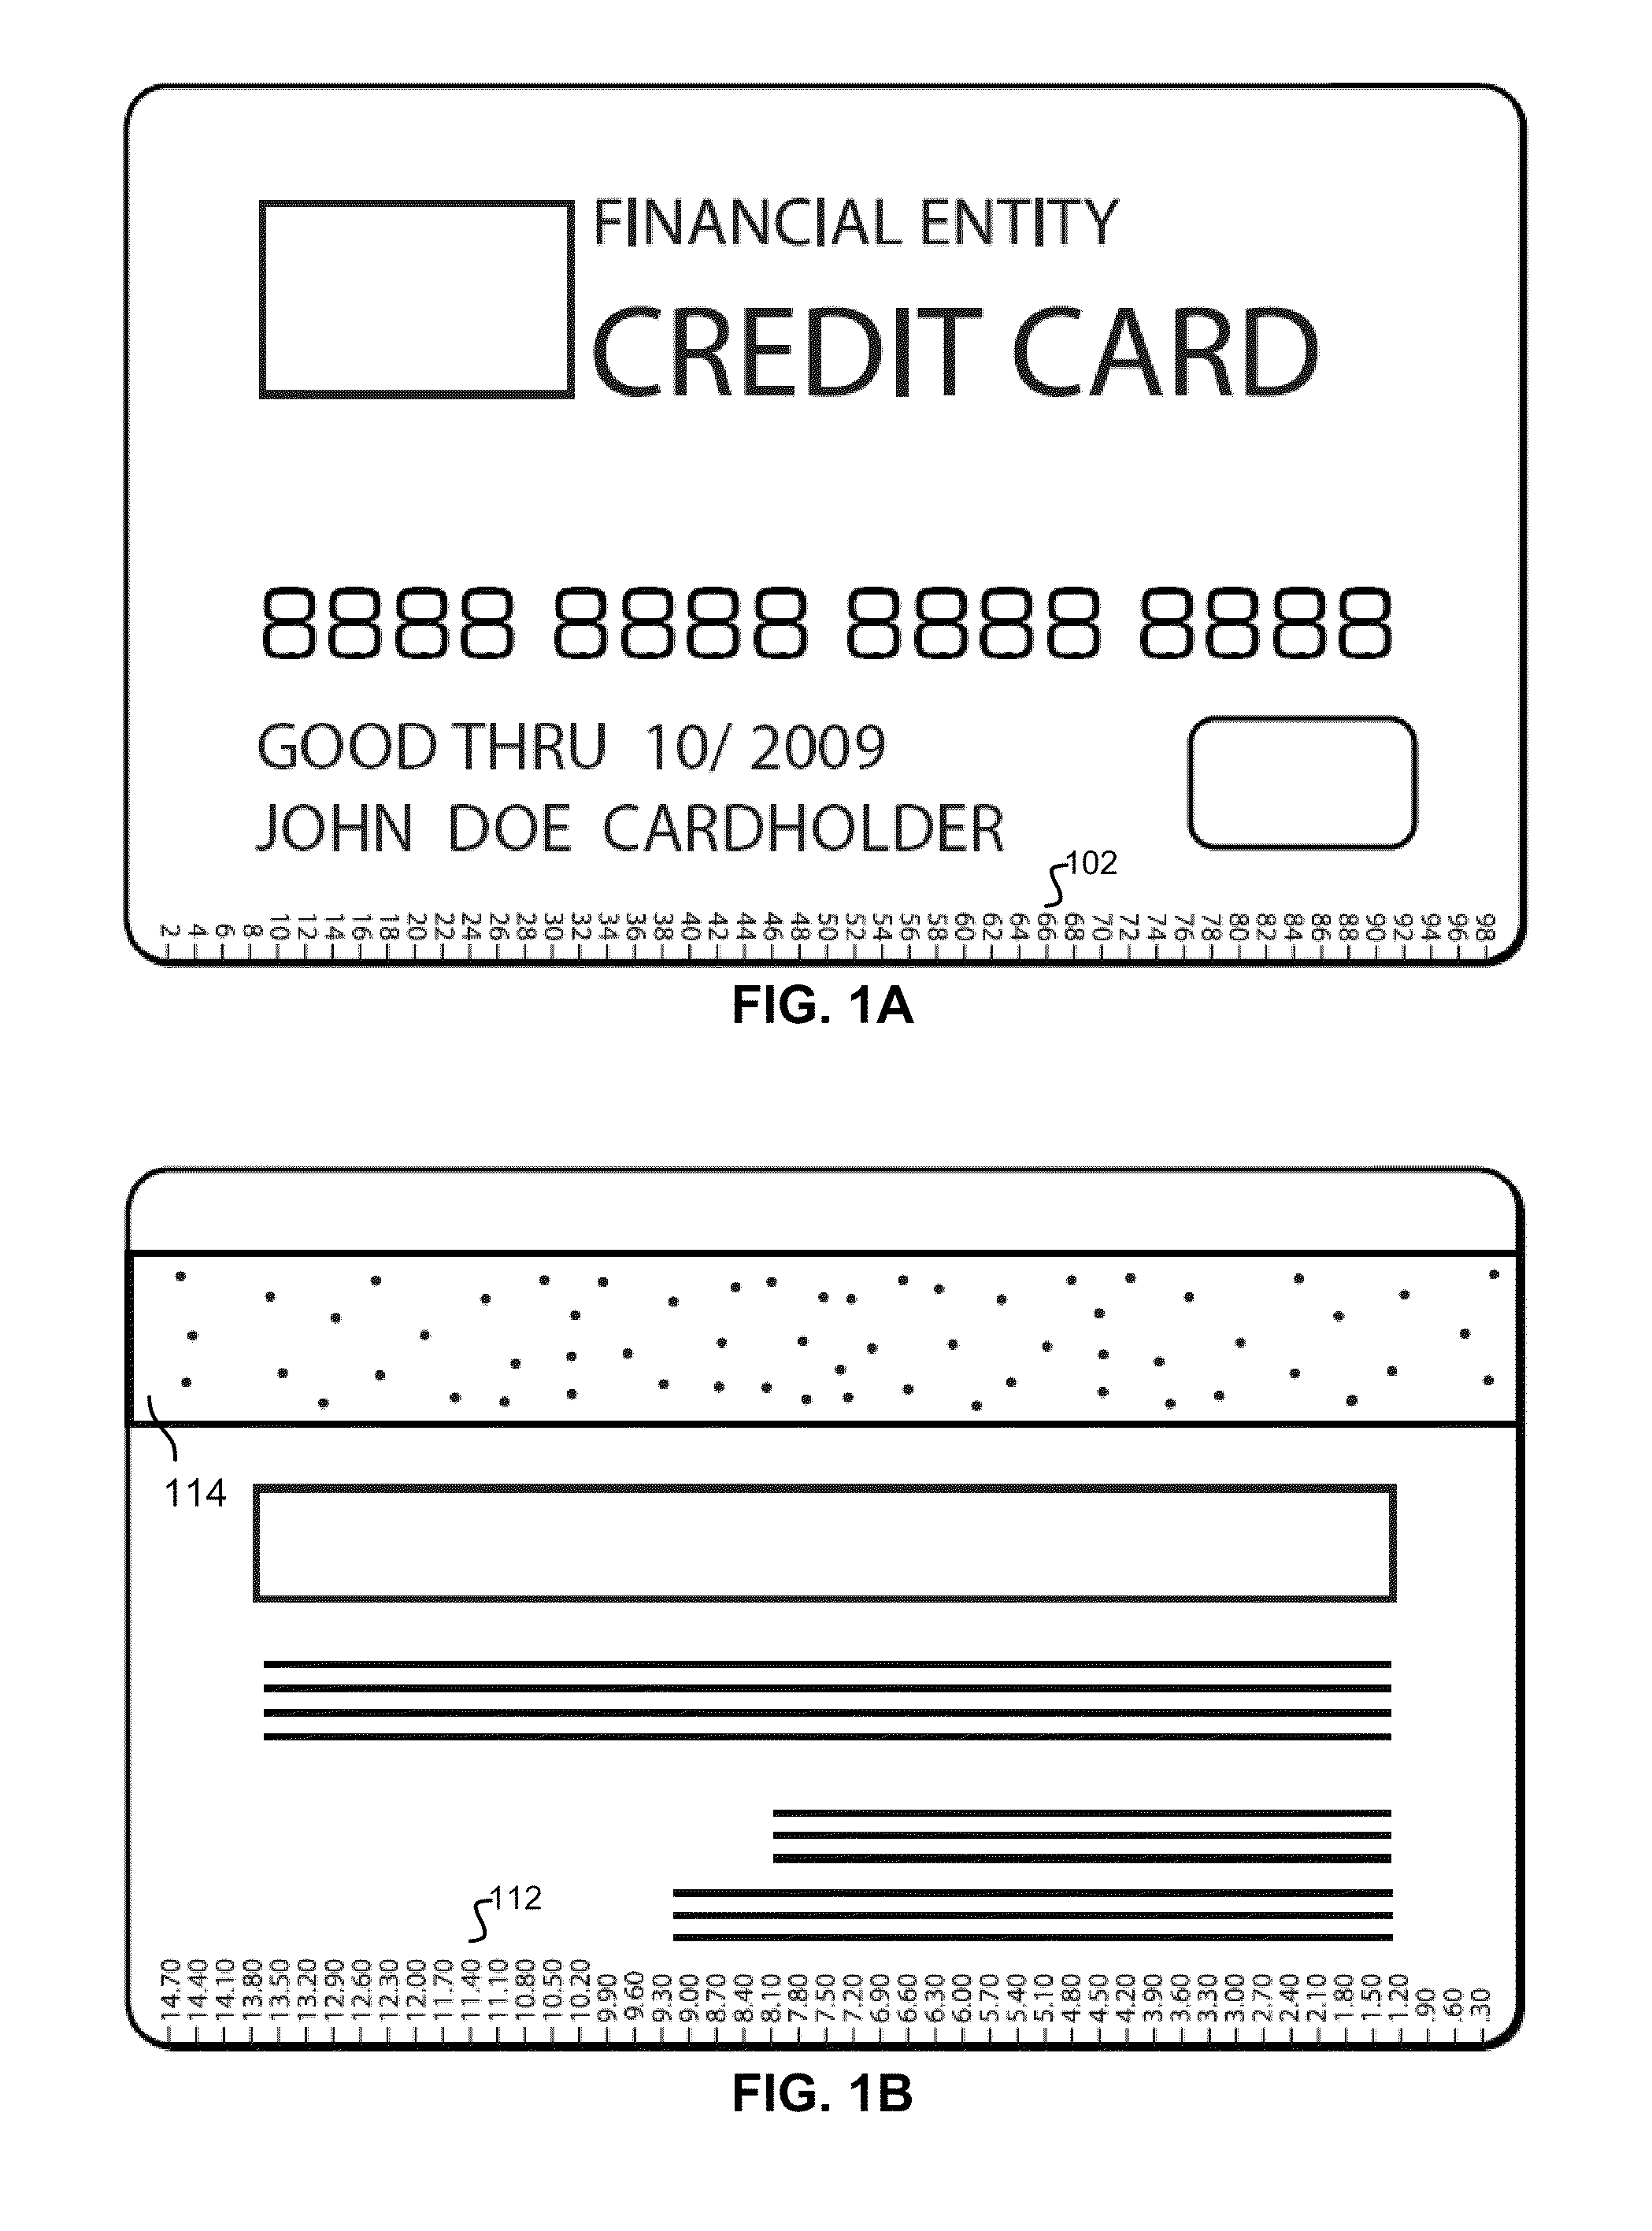 Transaction card with three-dimensional tipping guide